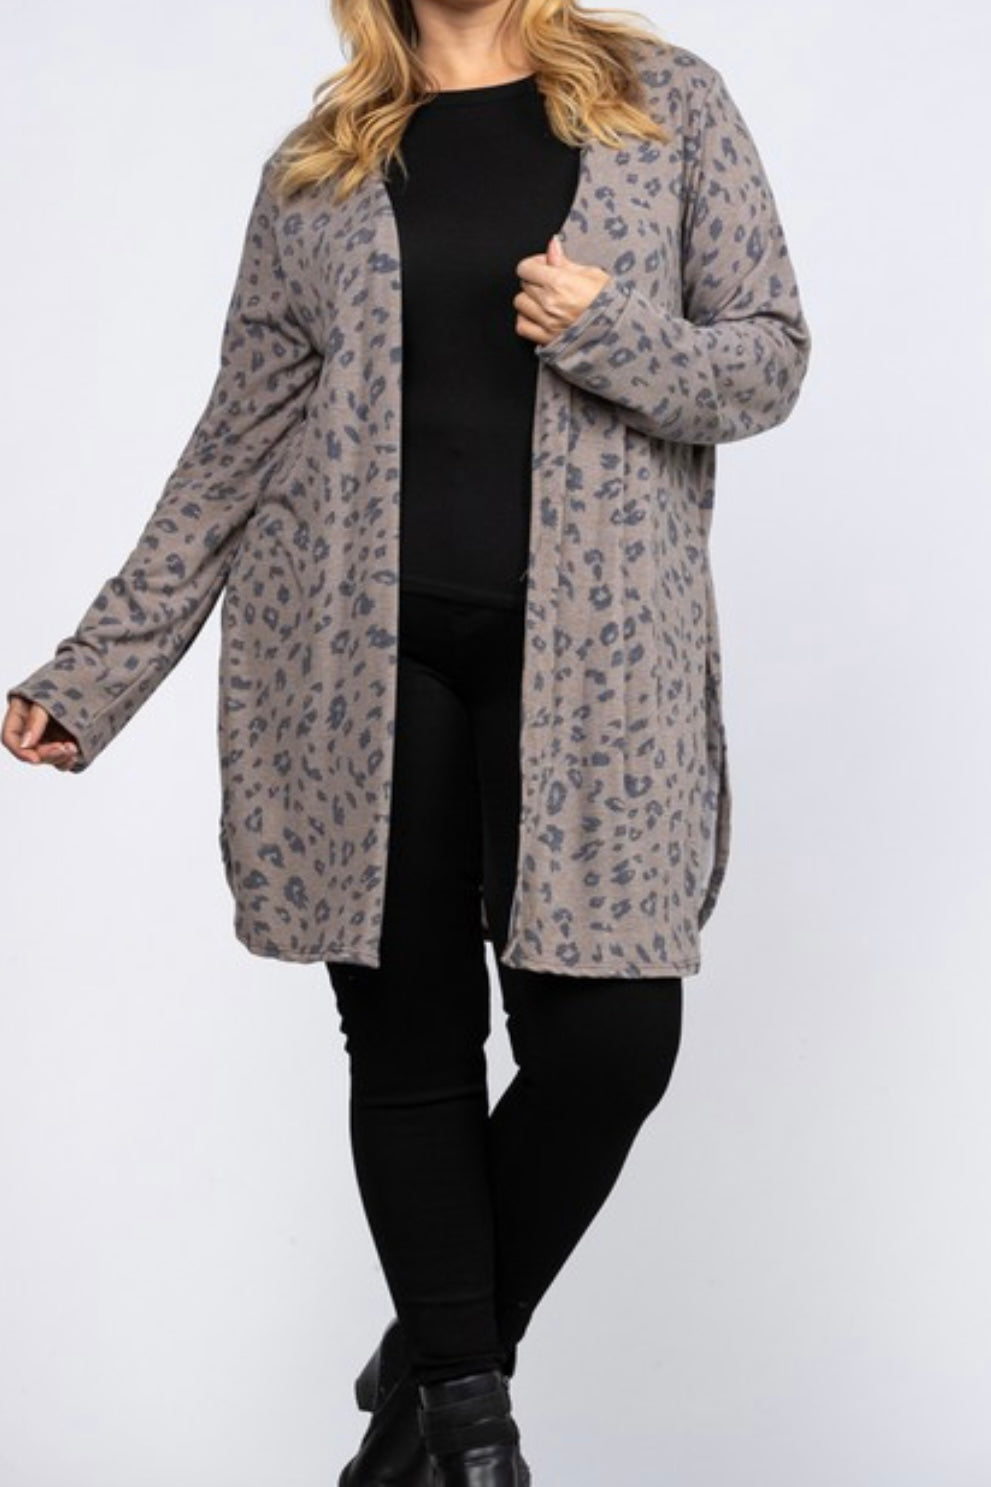 CURVY LEOPARD PRINT OPEN CARDI WITH SIDE SLITS